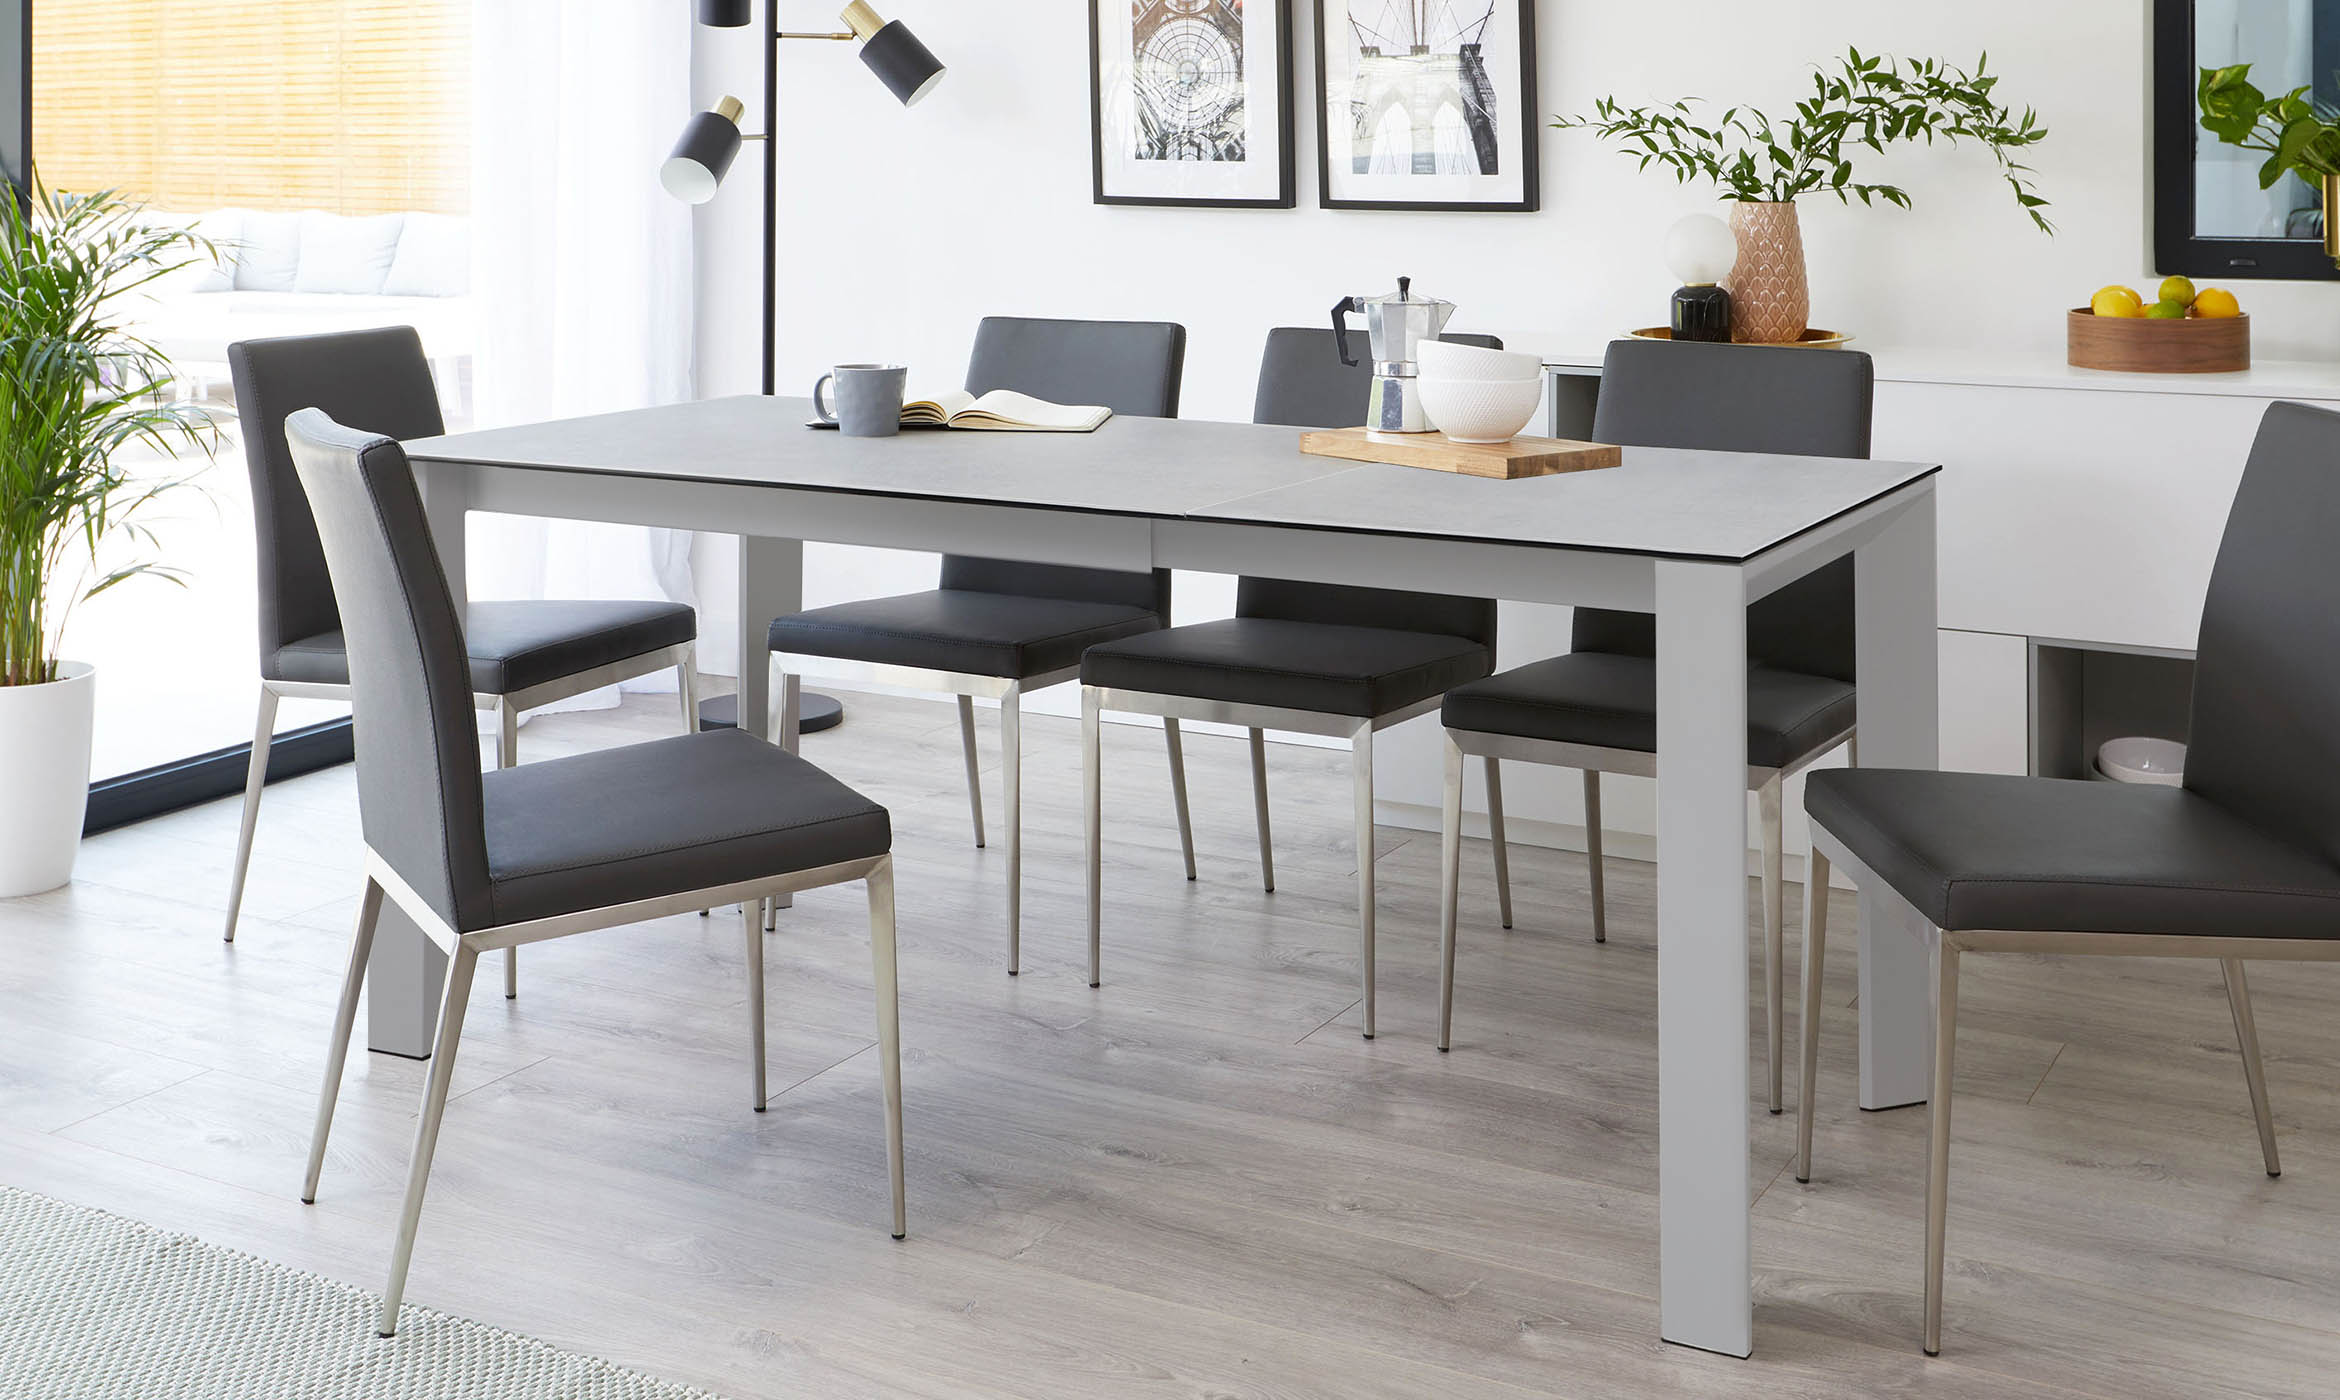 Louis Light Grey Ceramic Extending, Light Grey Wooden Dining Table And Chairs